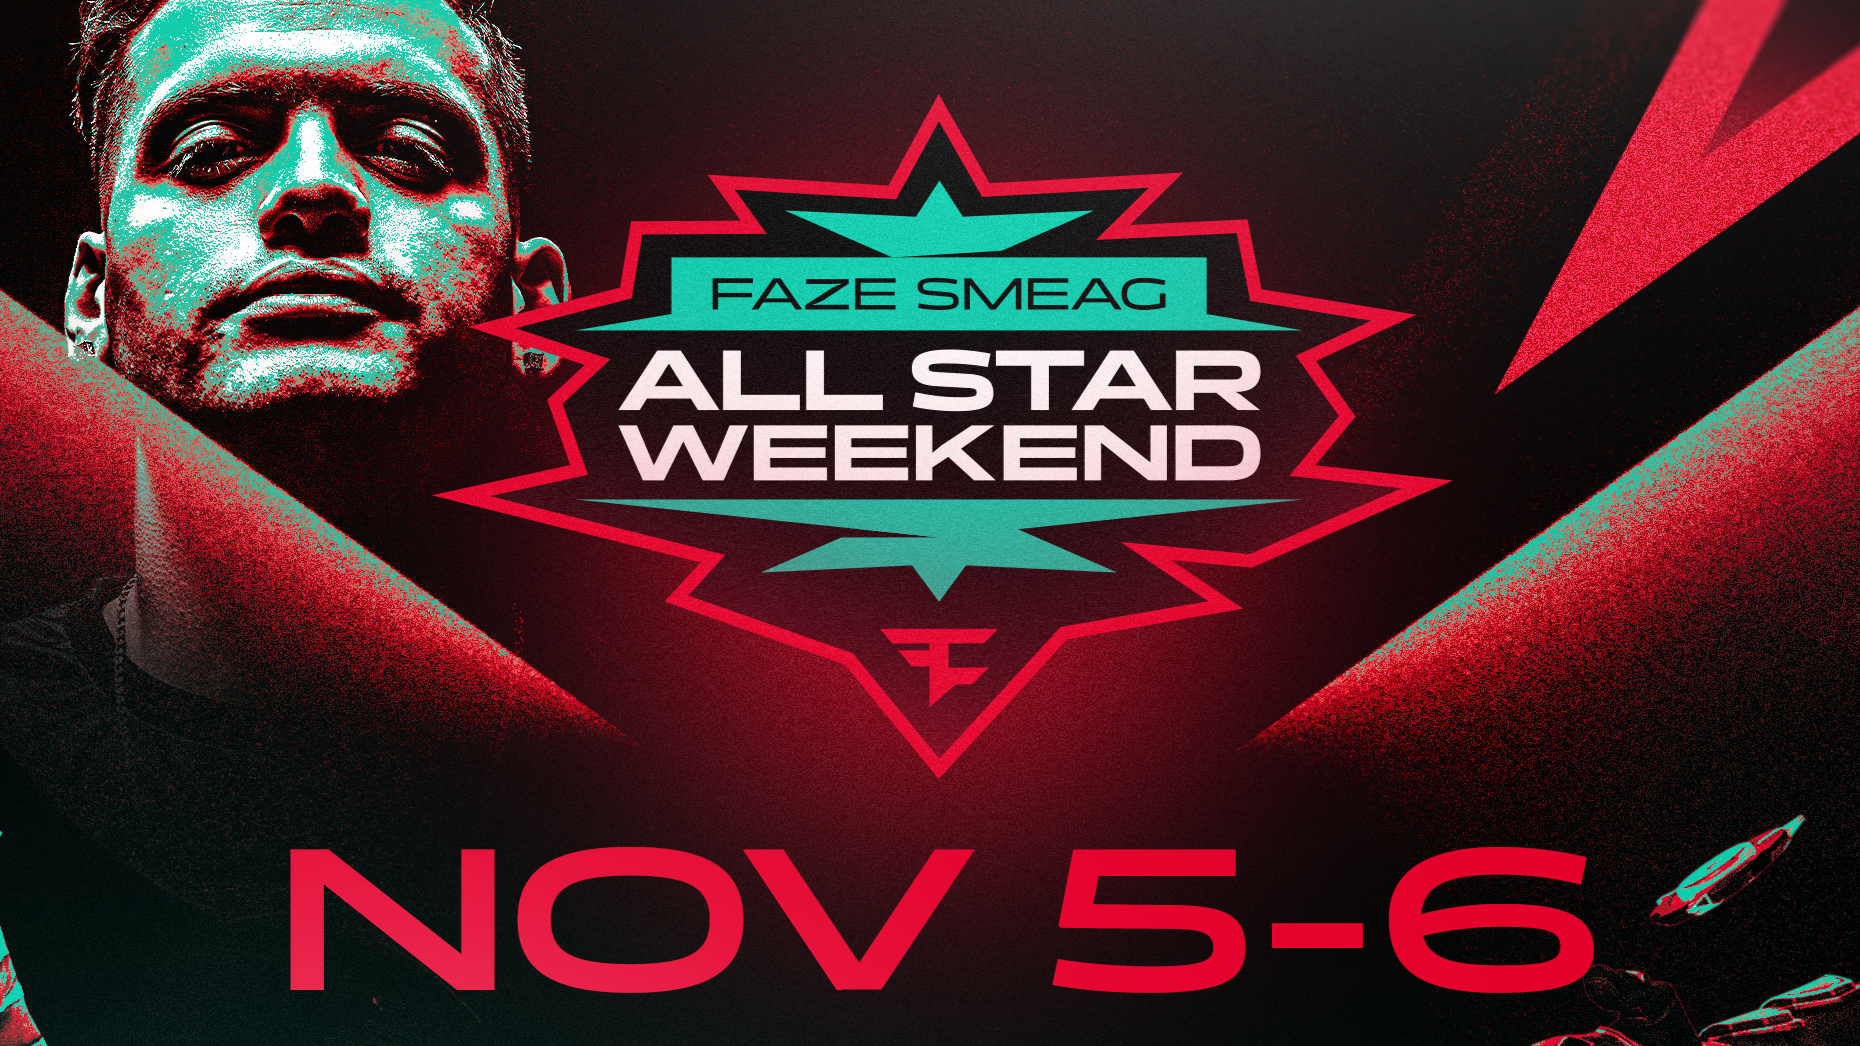 FaZe Smeag All Star Weekend to commence on November 5th